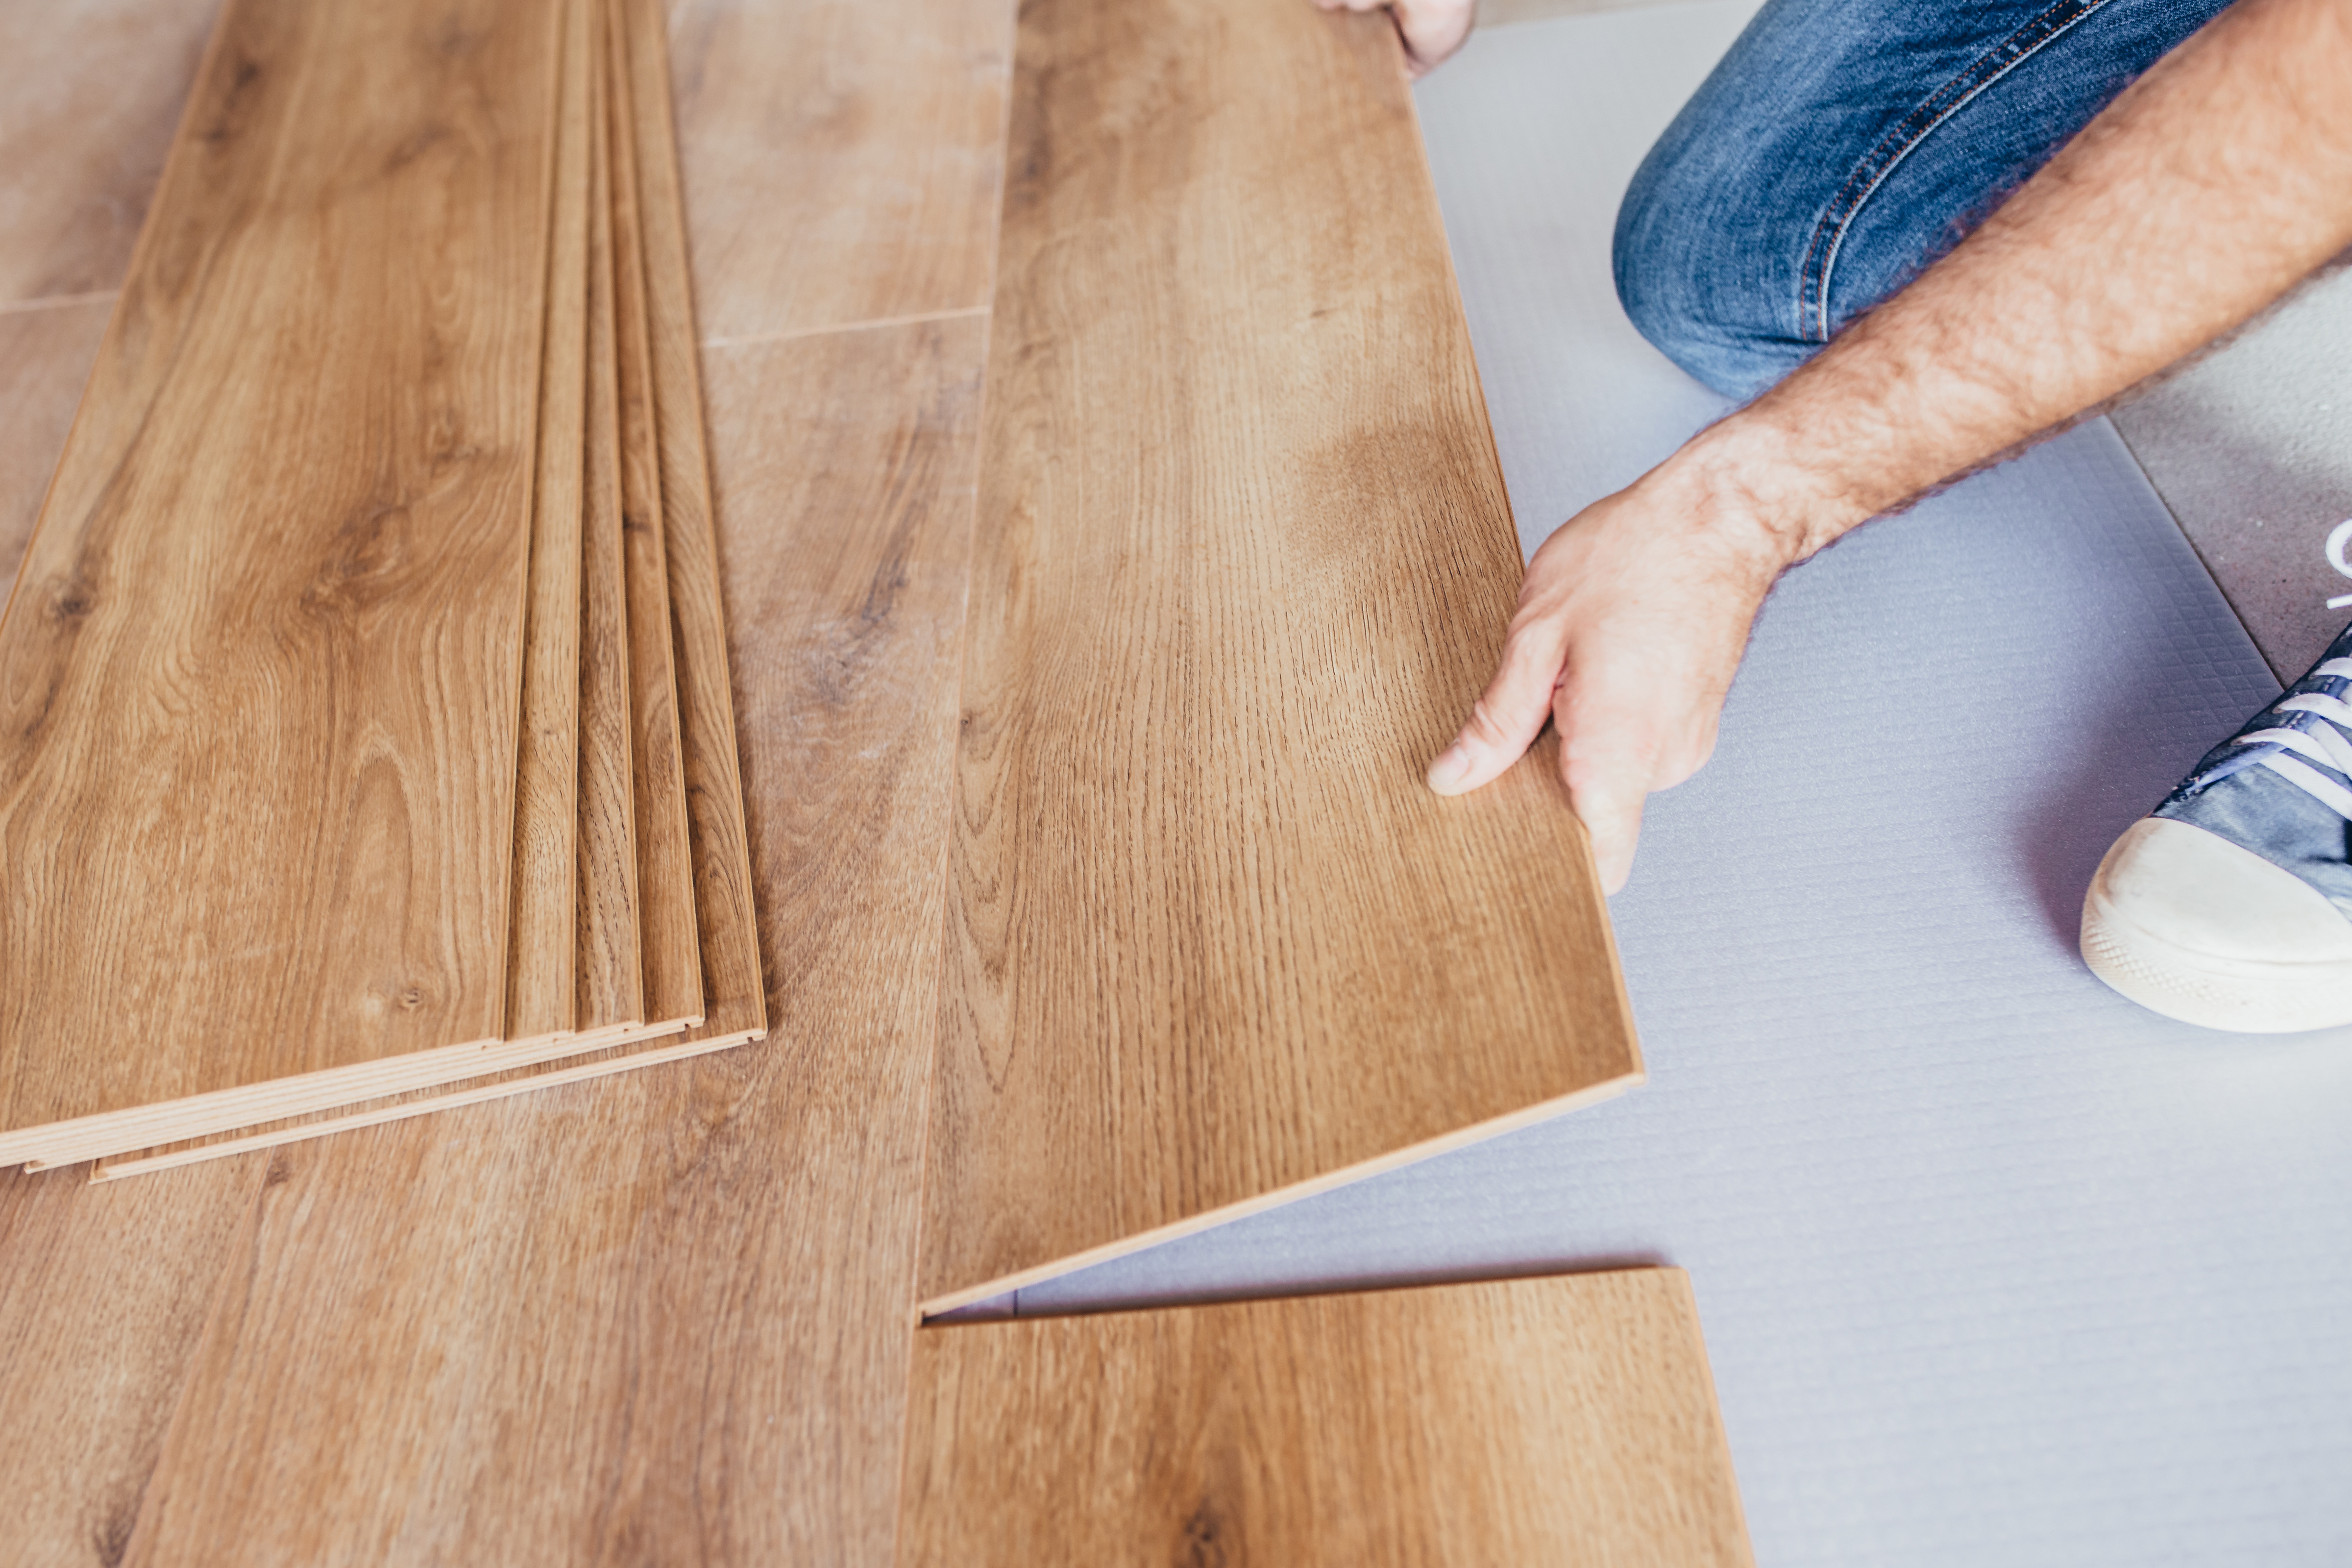 What Is A Floating Floor The Basics, What To Do When Laminate Flooring Wont Snap Together